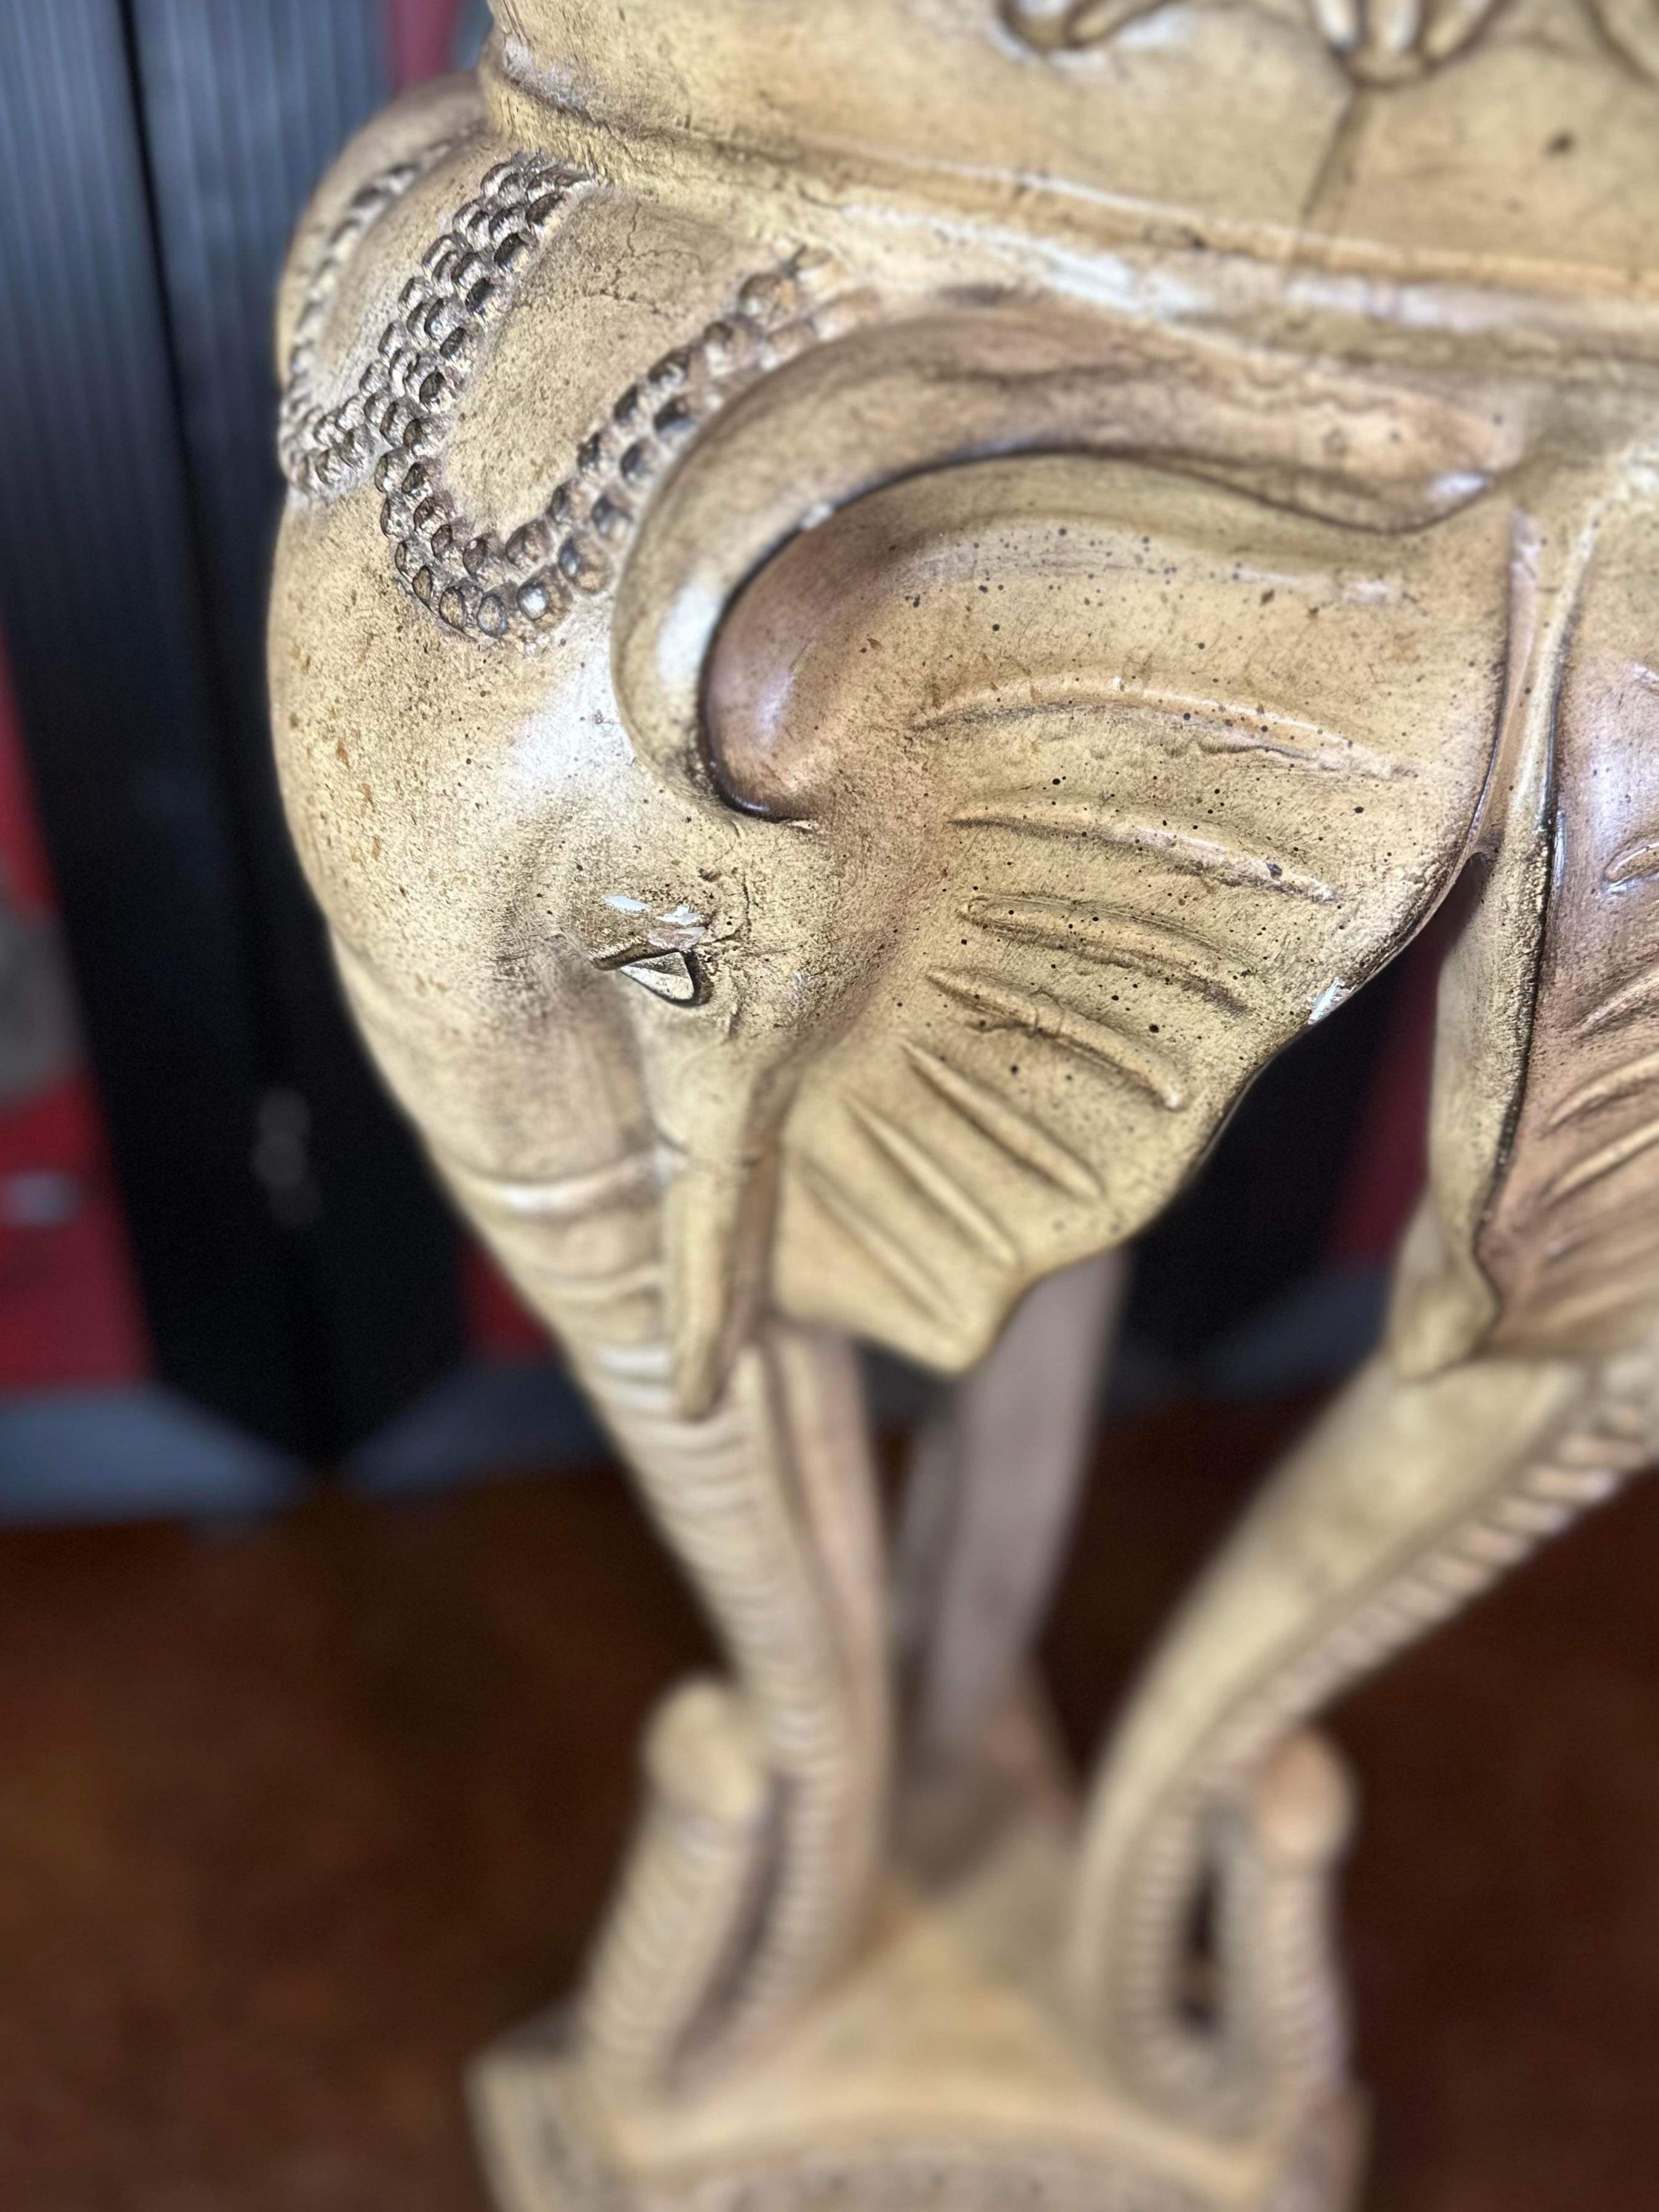 Free shipping in the continental United States. 

Statement piece. 
Could be a planter, plant stand, pedestal for art or stand alone piece of art.
Three elephant heads supported by three long, bent elephant trunks.
Elaborate foliage on the bowl, or